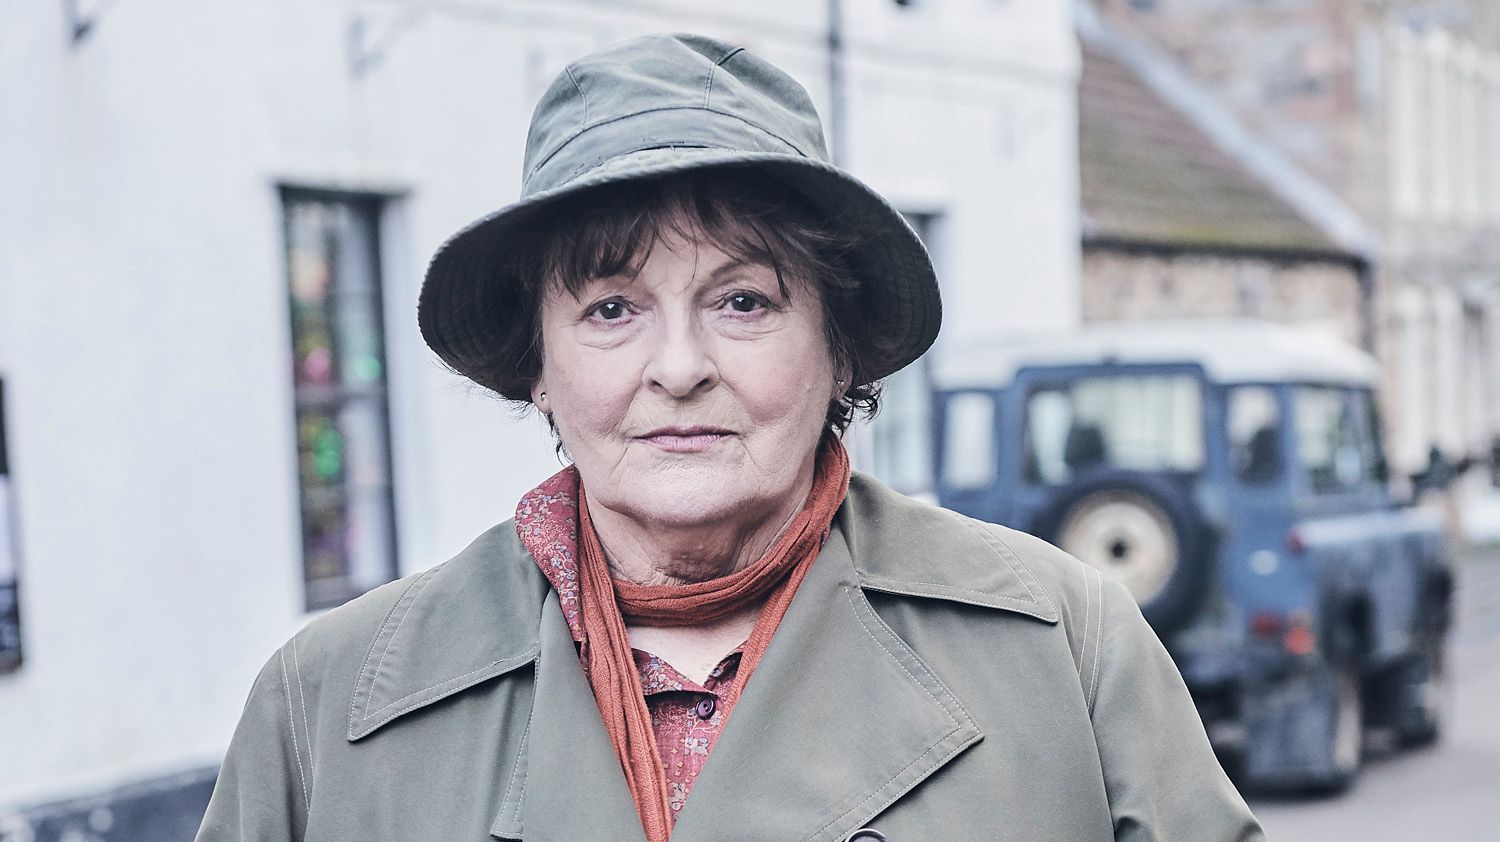 When is the Vera Christmas special?